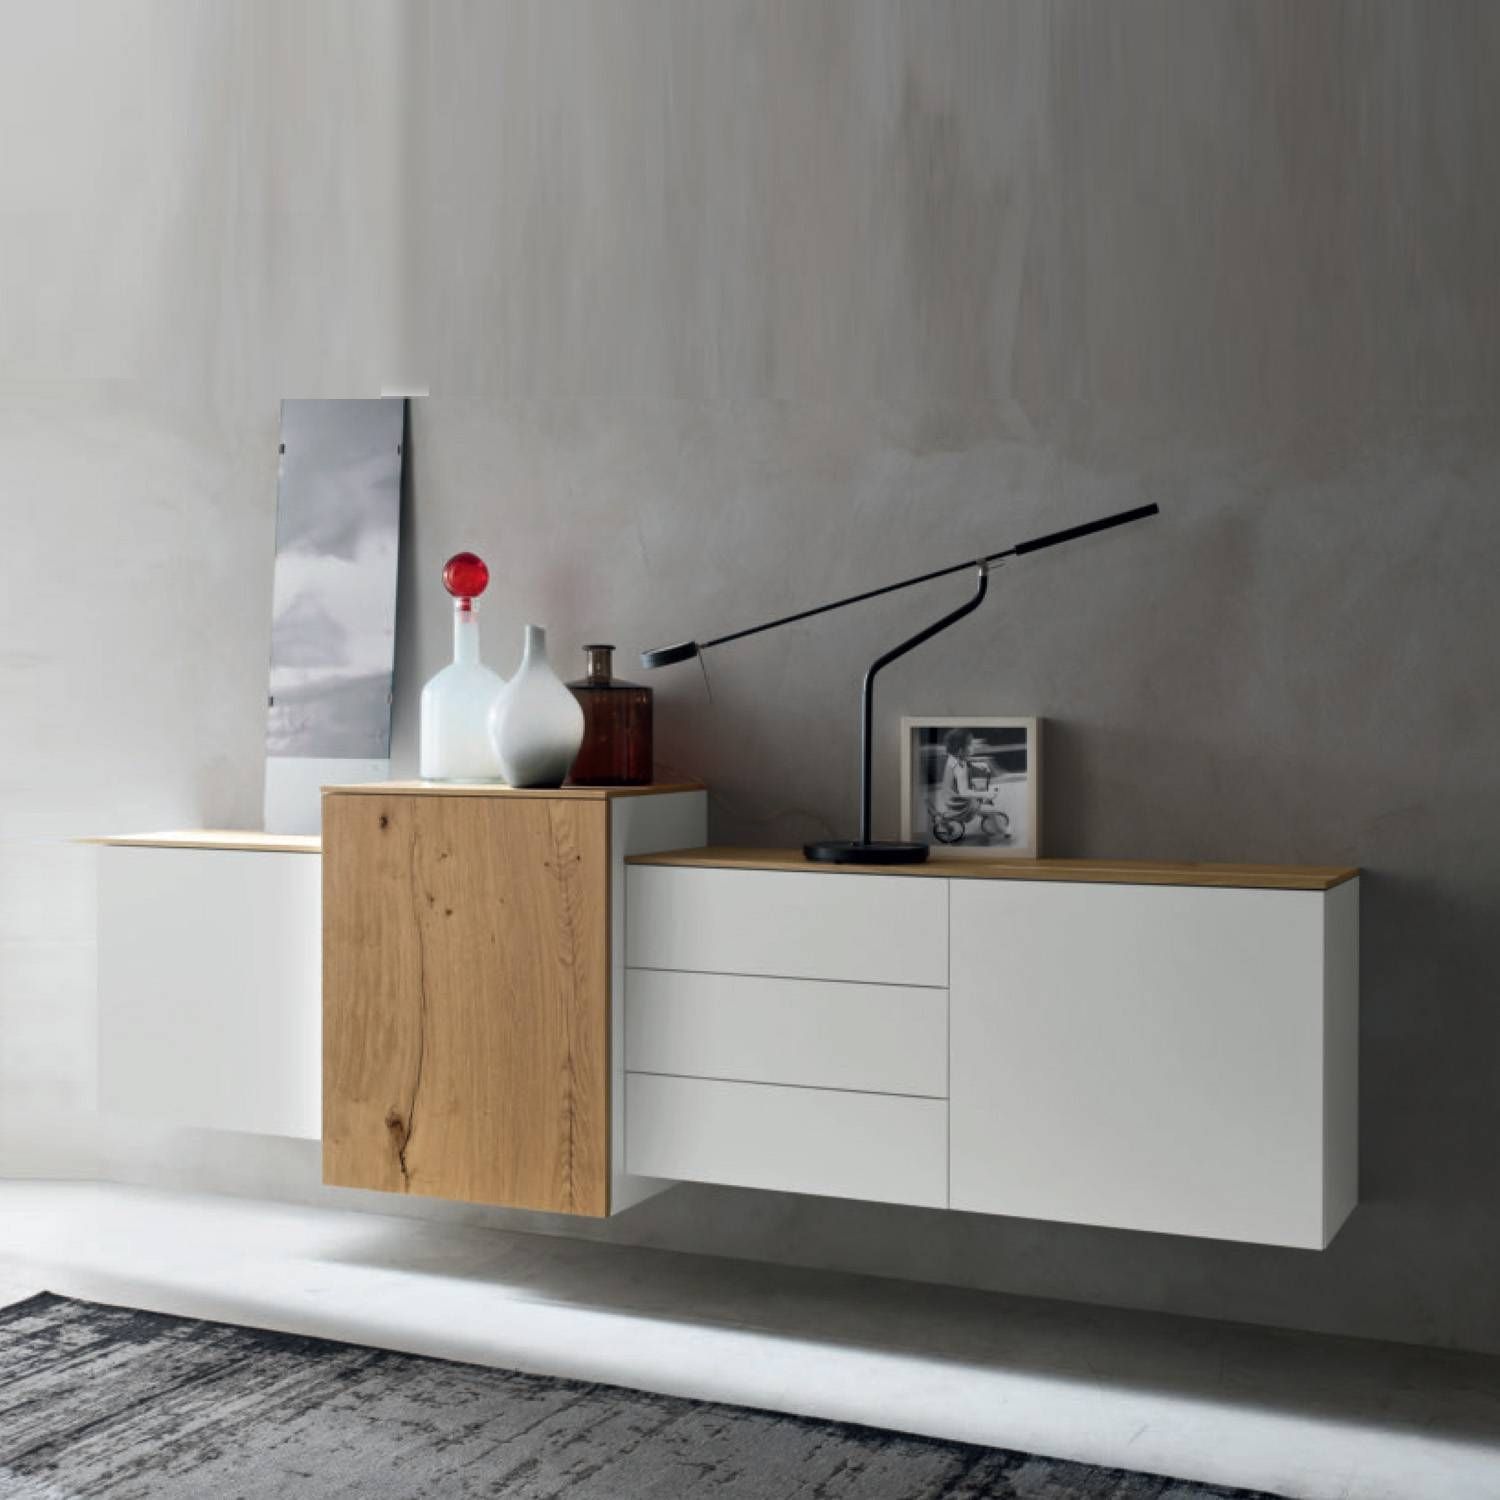 Modern Contemporary Sideboards, Storage Units My Italian Living Ltd With Regard To Contemporary Sideboard (View 9 of 20)